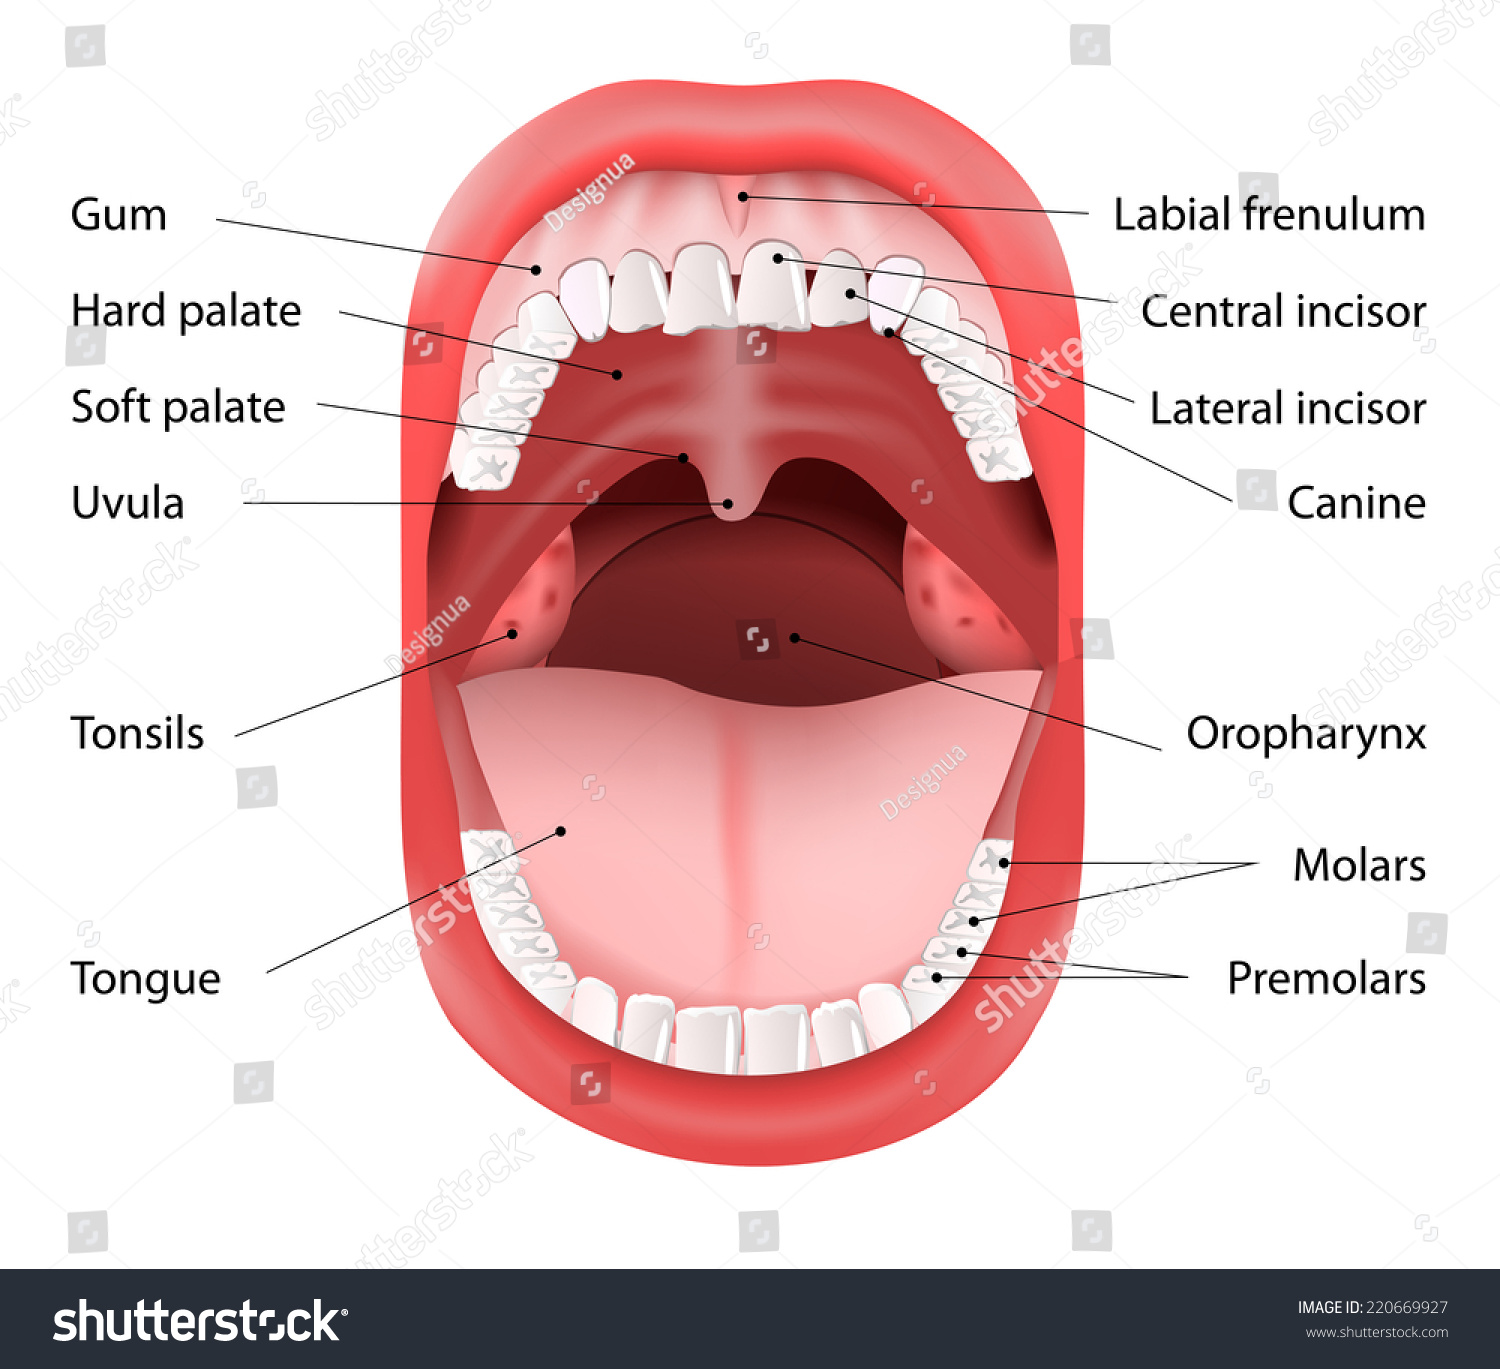 How Many Teeth Are In The Human Mouth 95